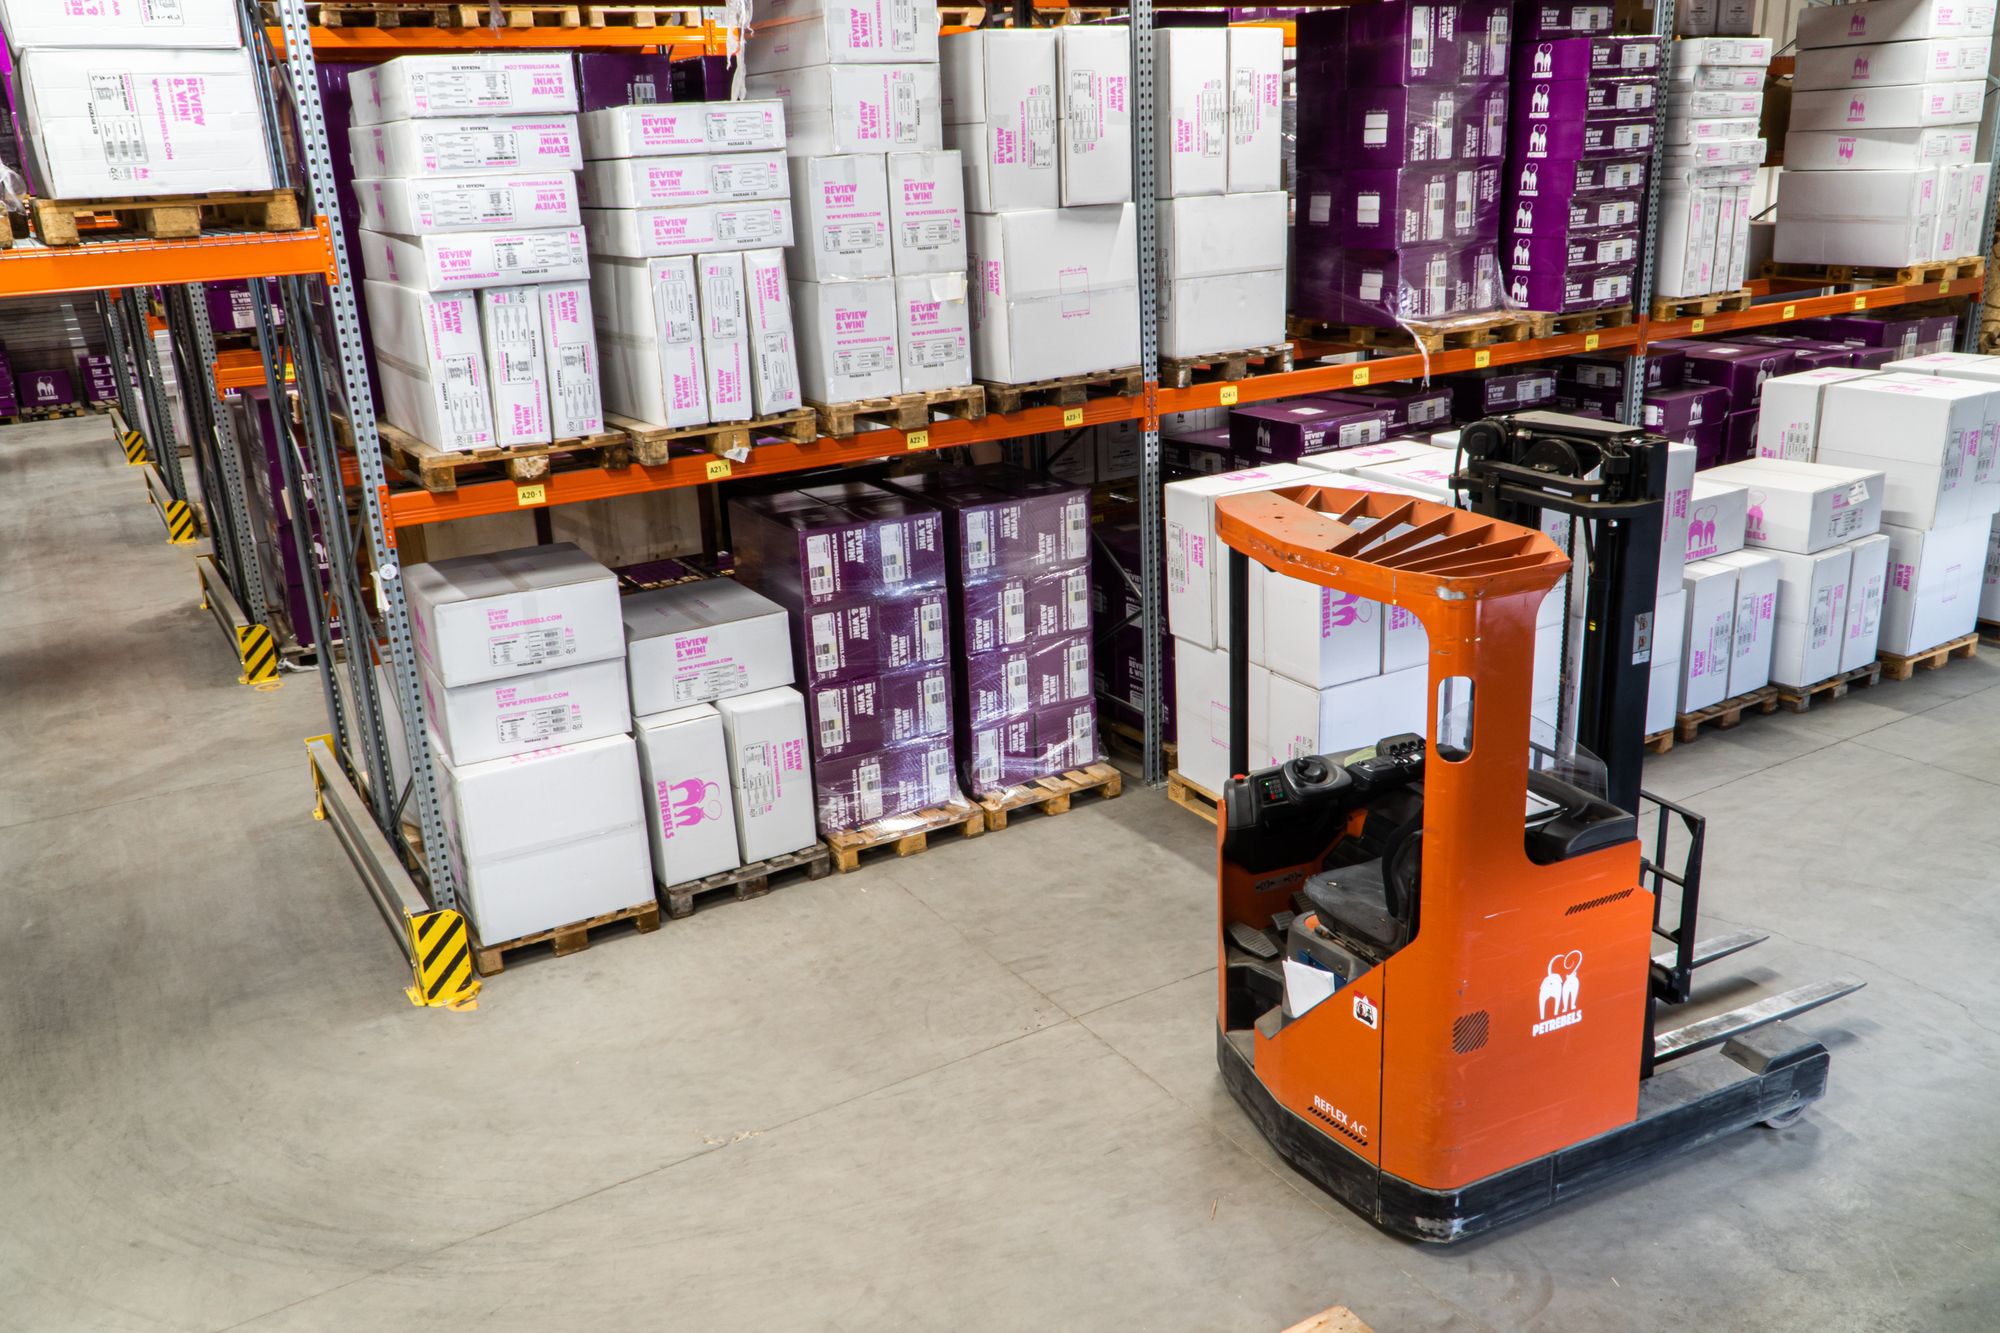 A forklift in a warehouse.